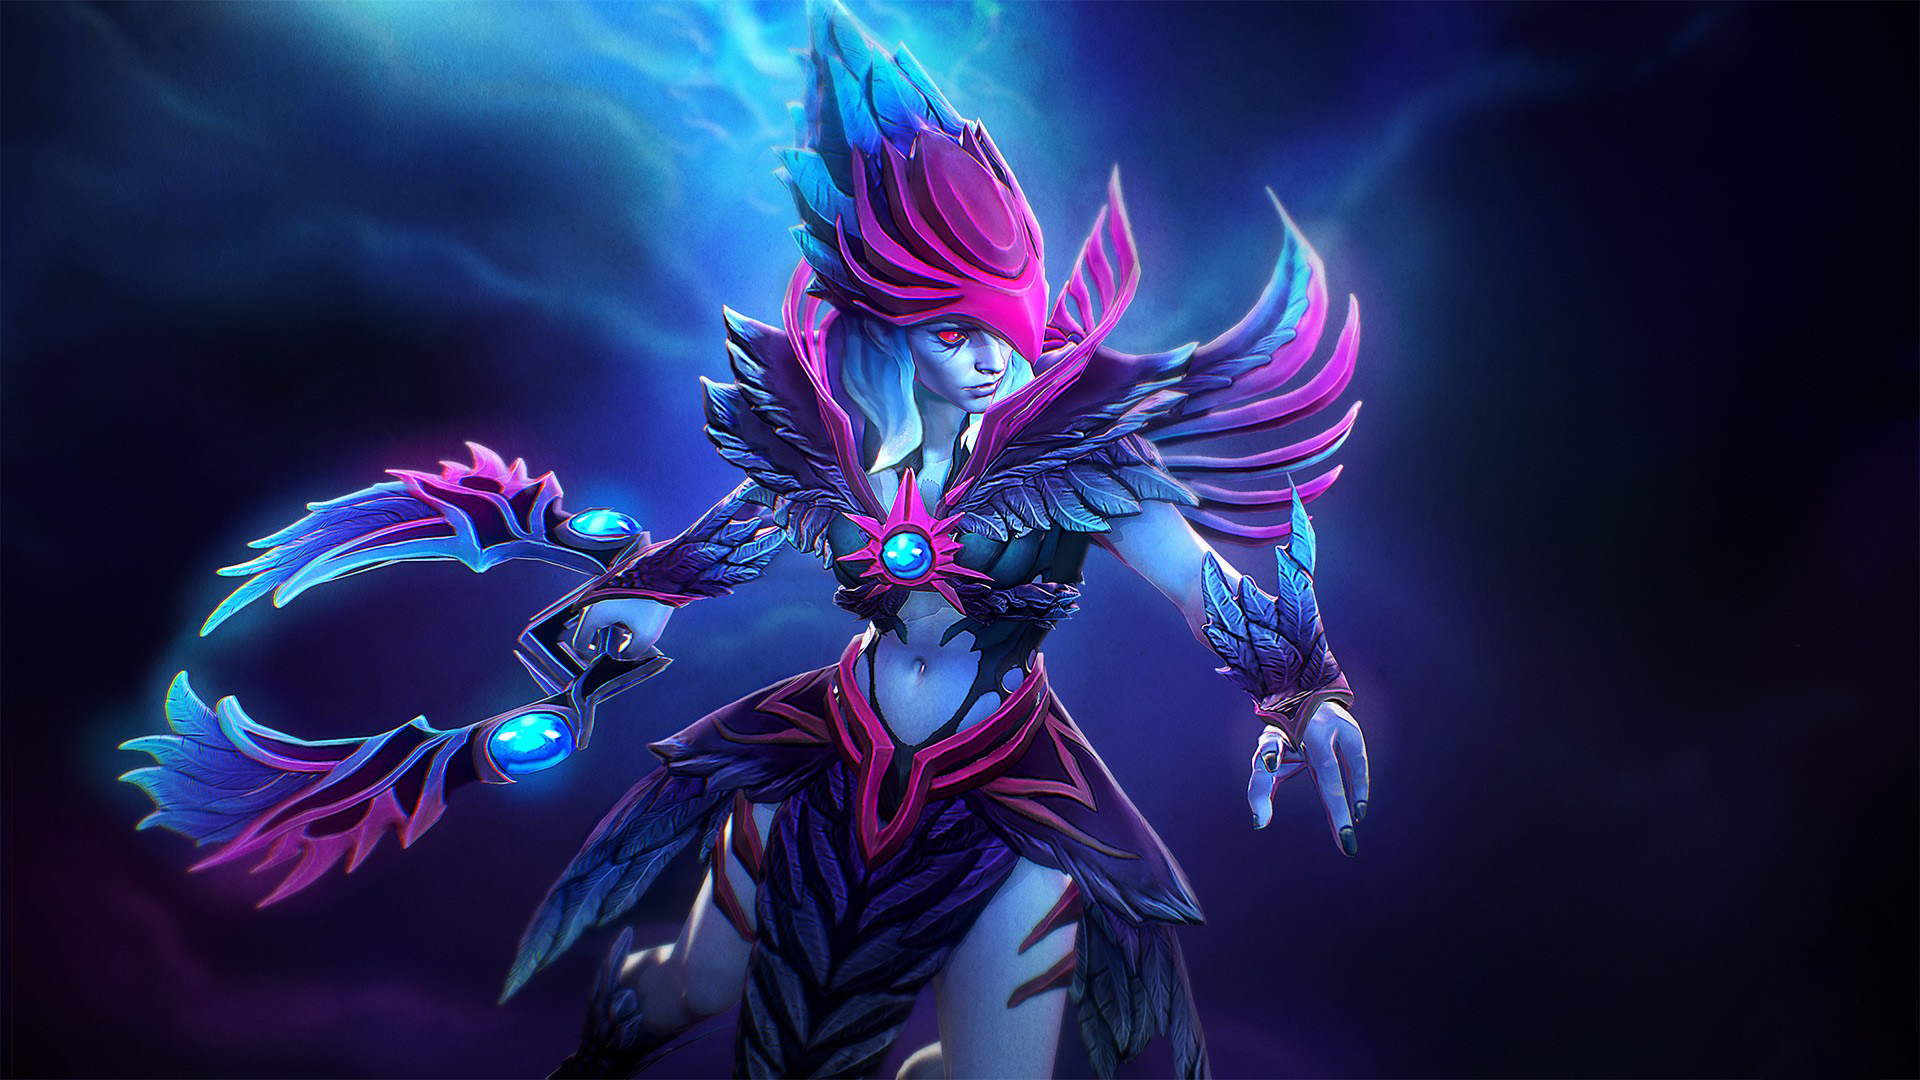 dota 2 wallpapers hd,cg artwork,fictional character,graphic design,darkness,anime